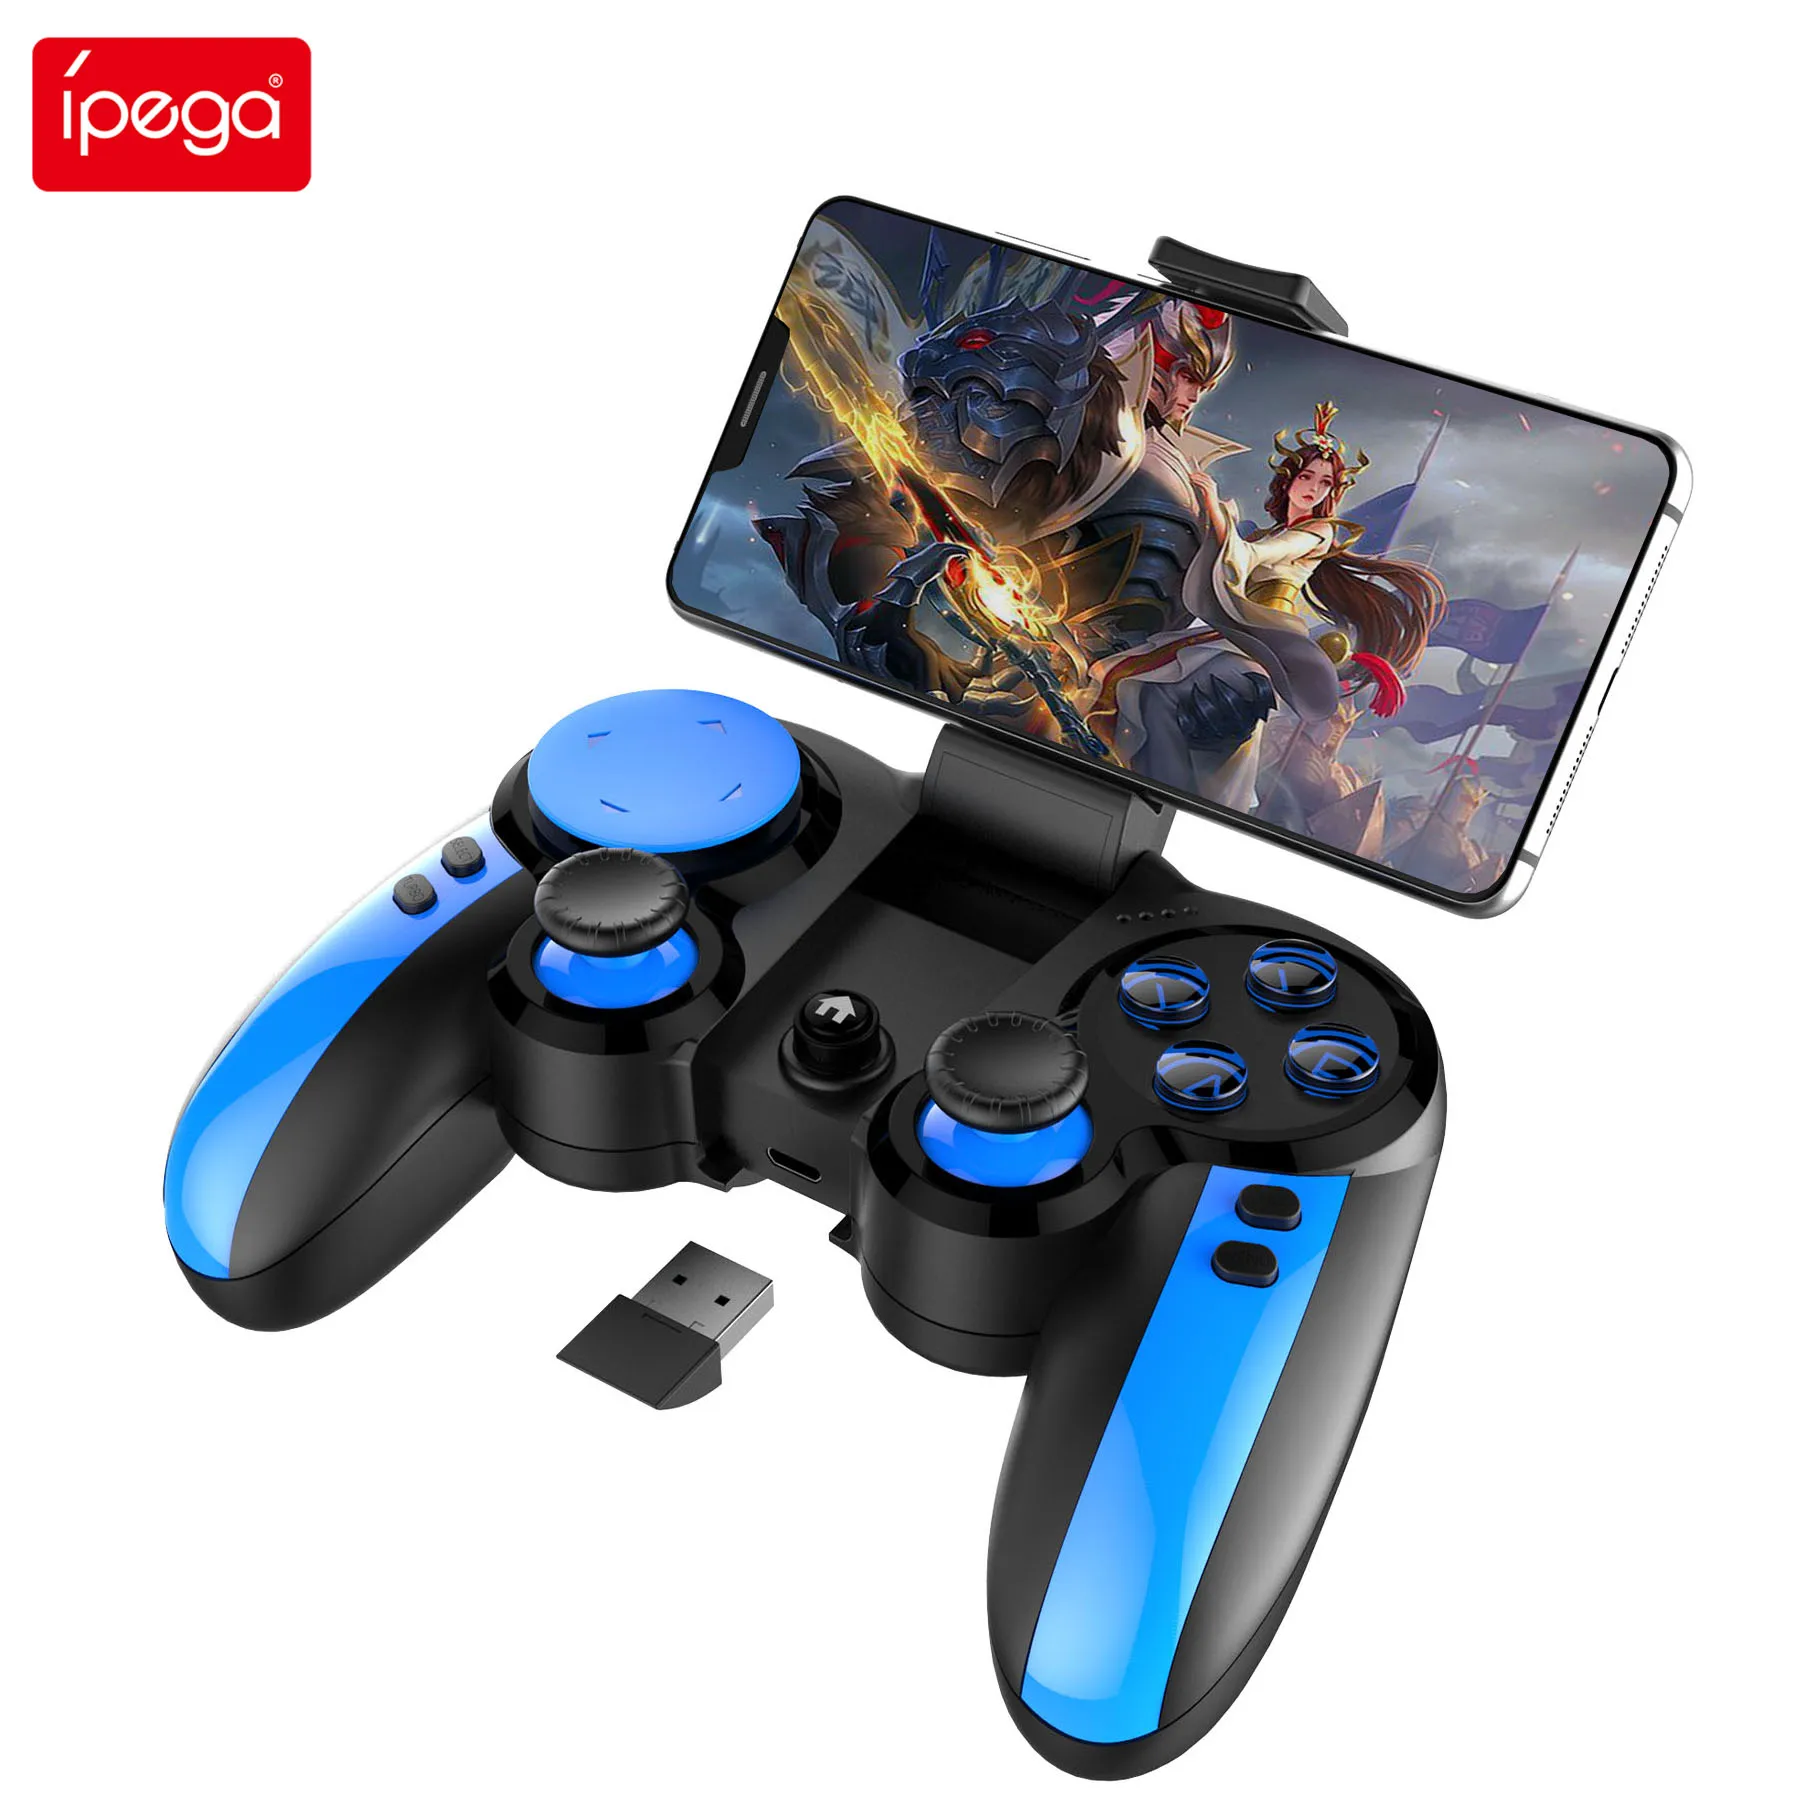 

IPEGA 2021 new products video portable joystick mobile game controller wireless gamepad handheld game, Black & blue